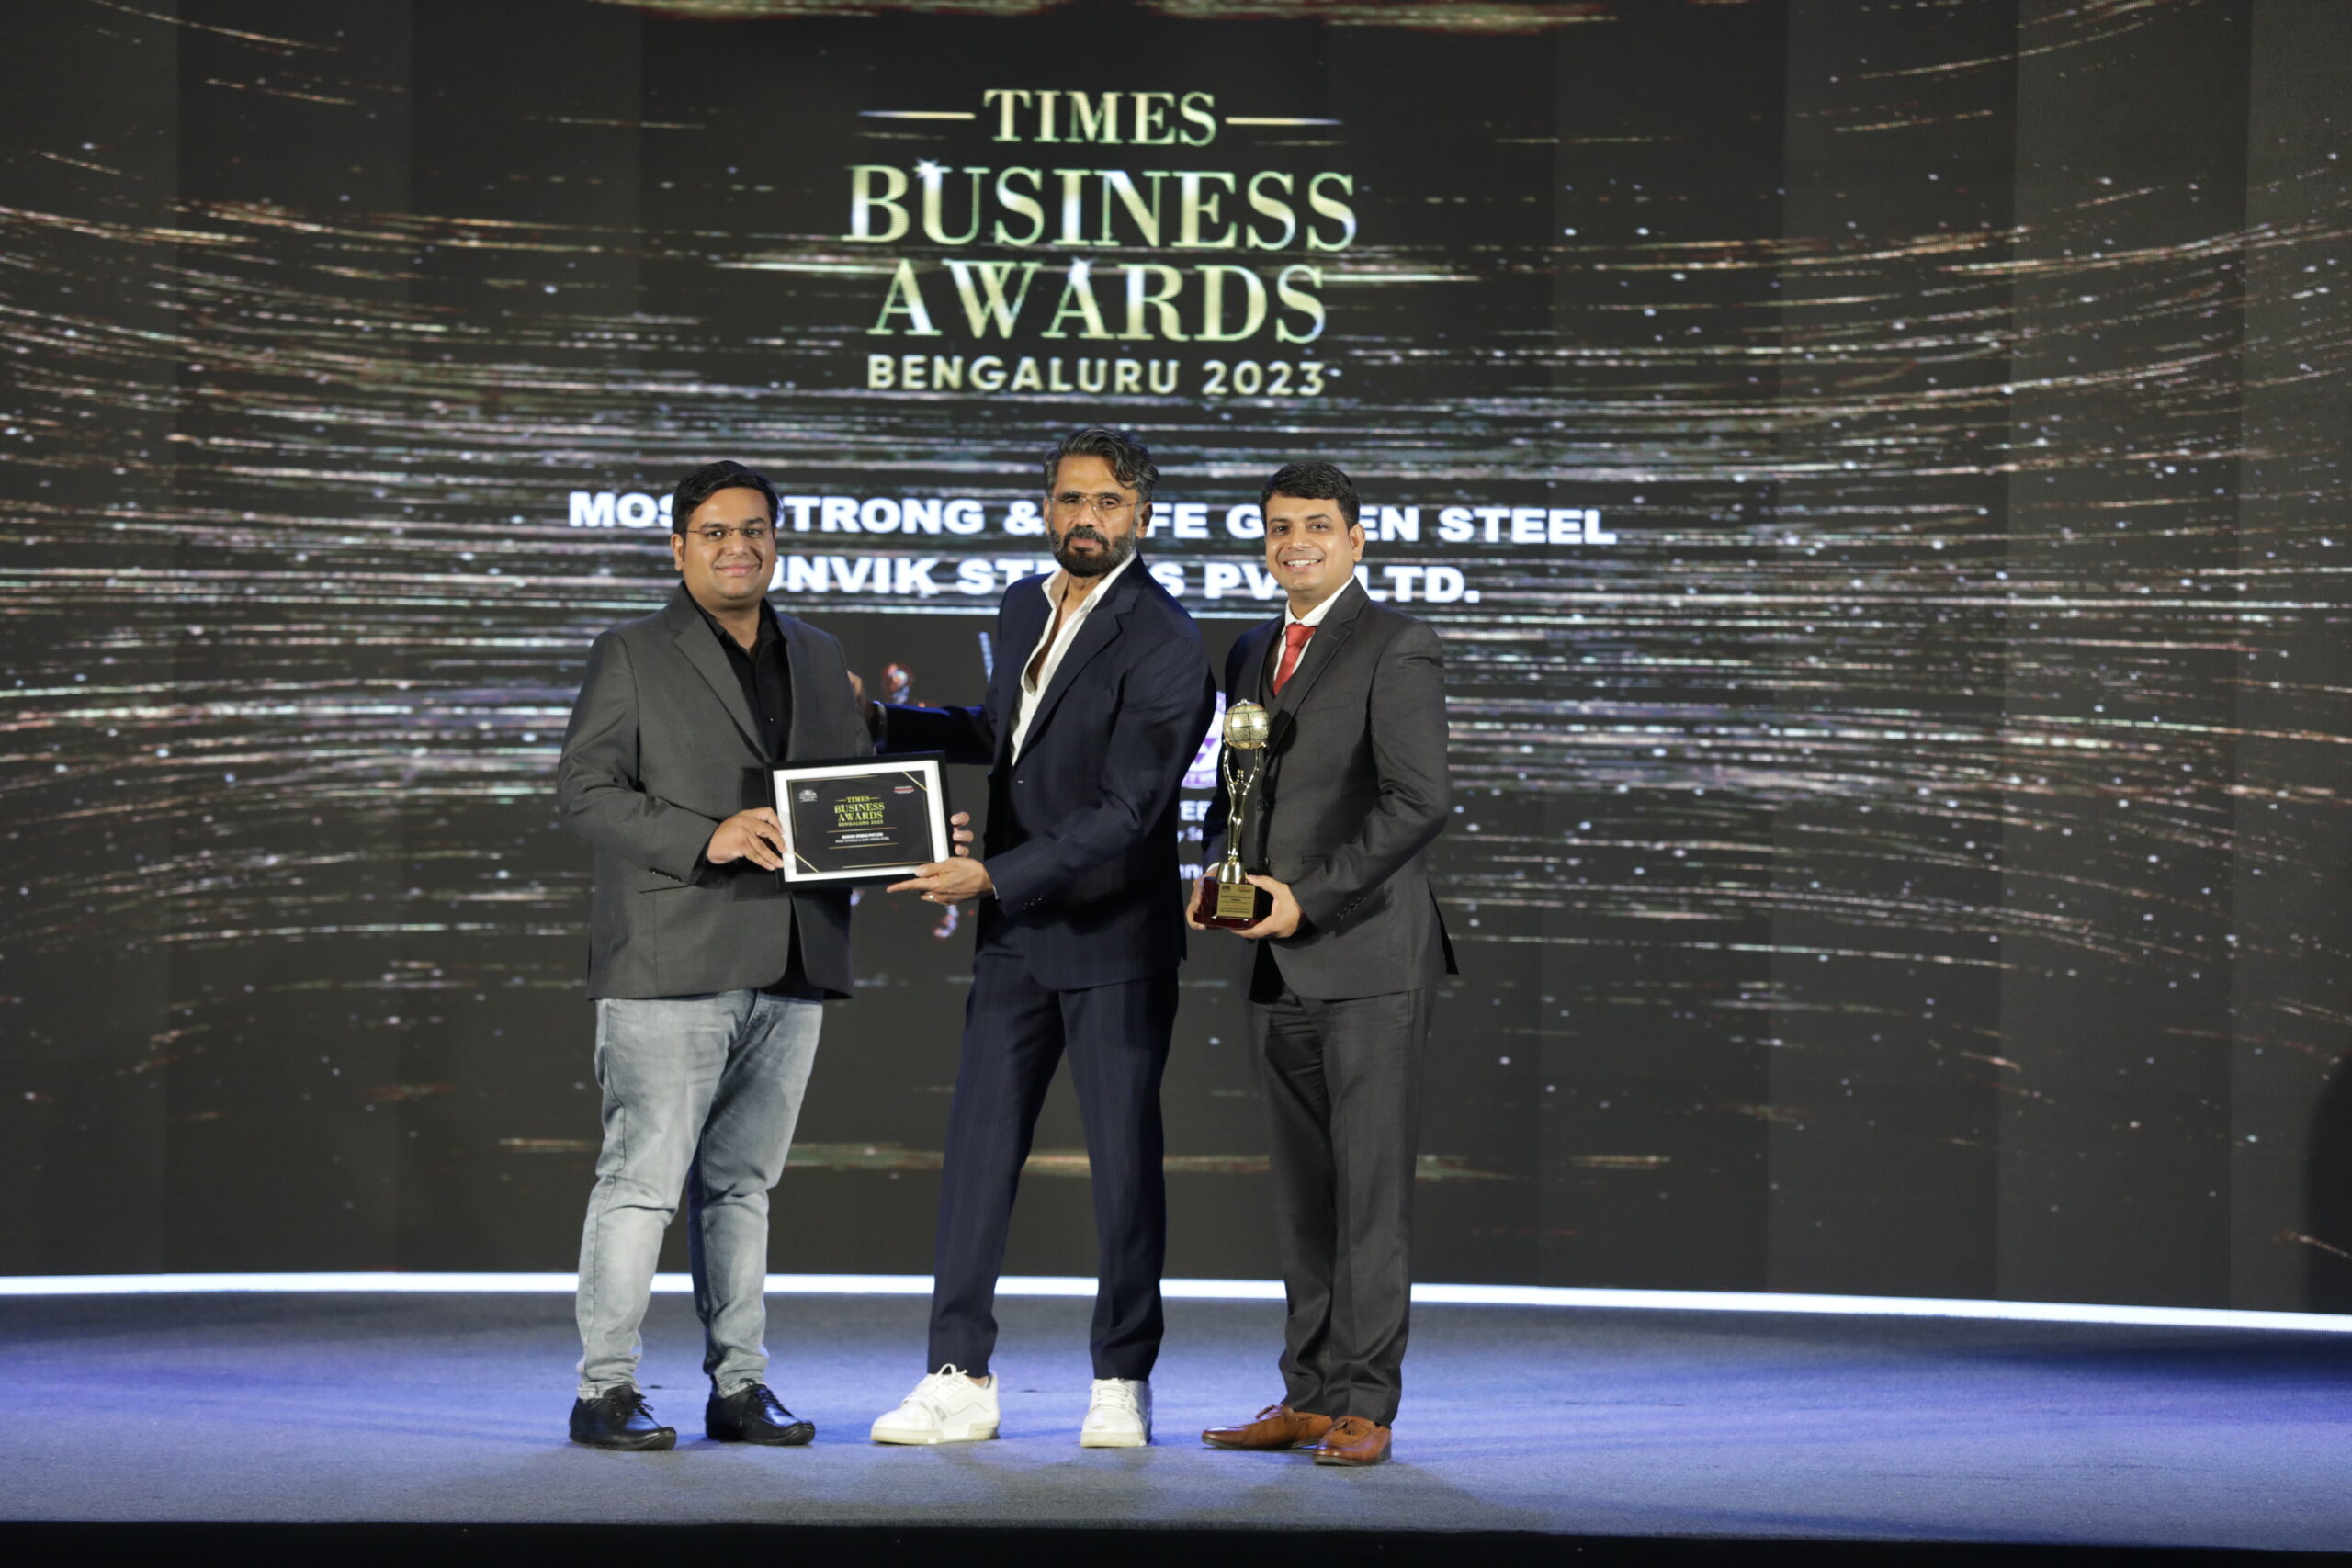 Times Business Awards 2023